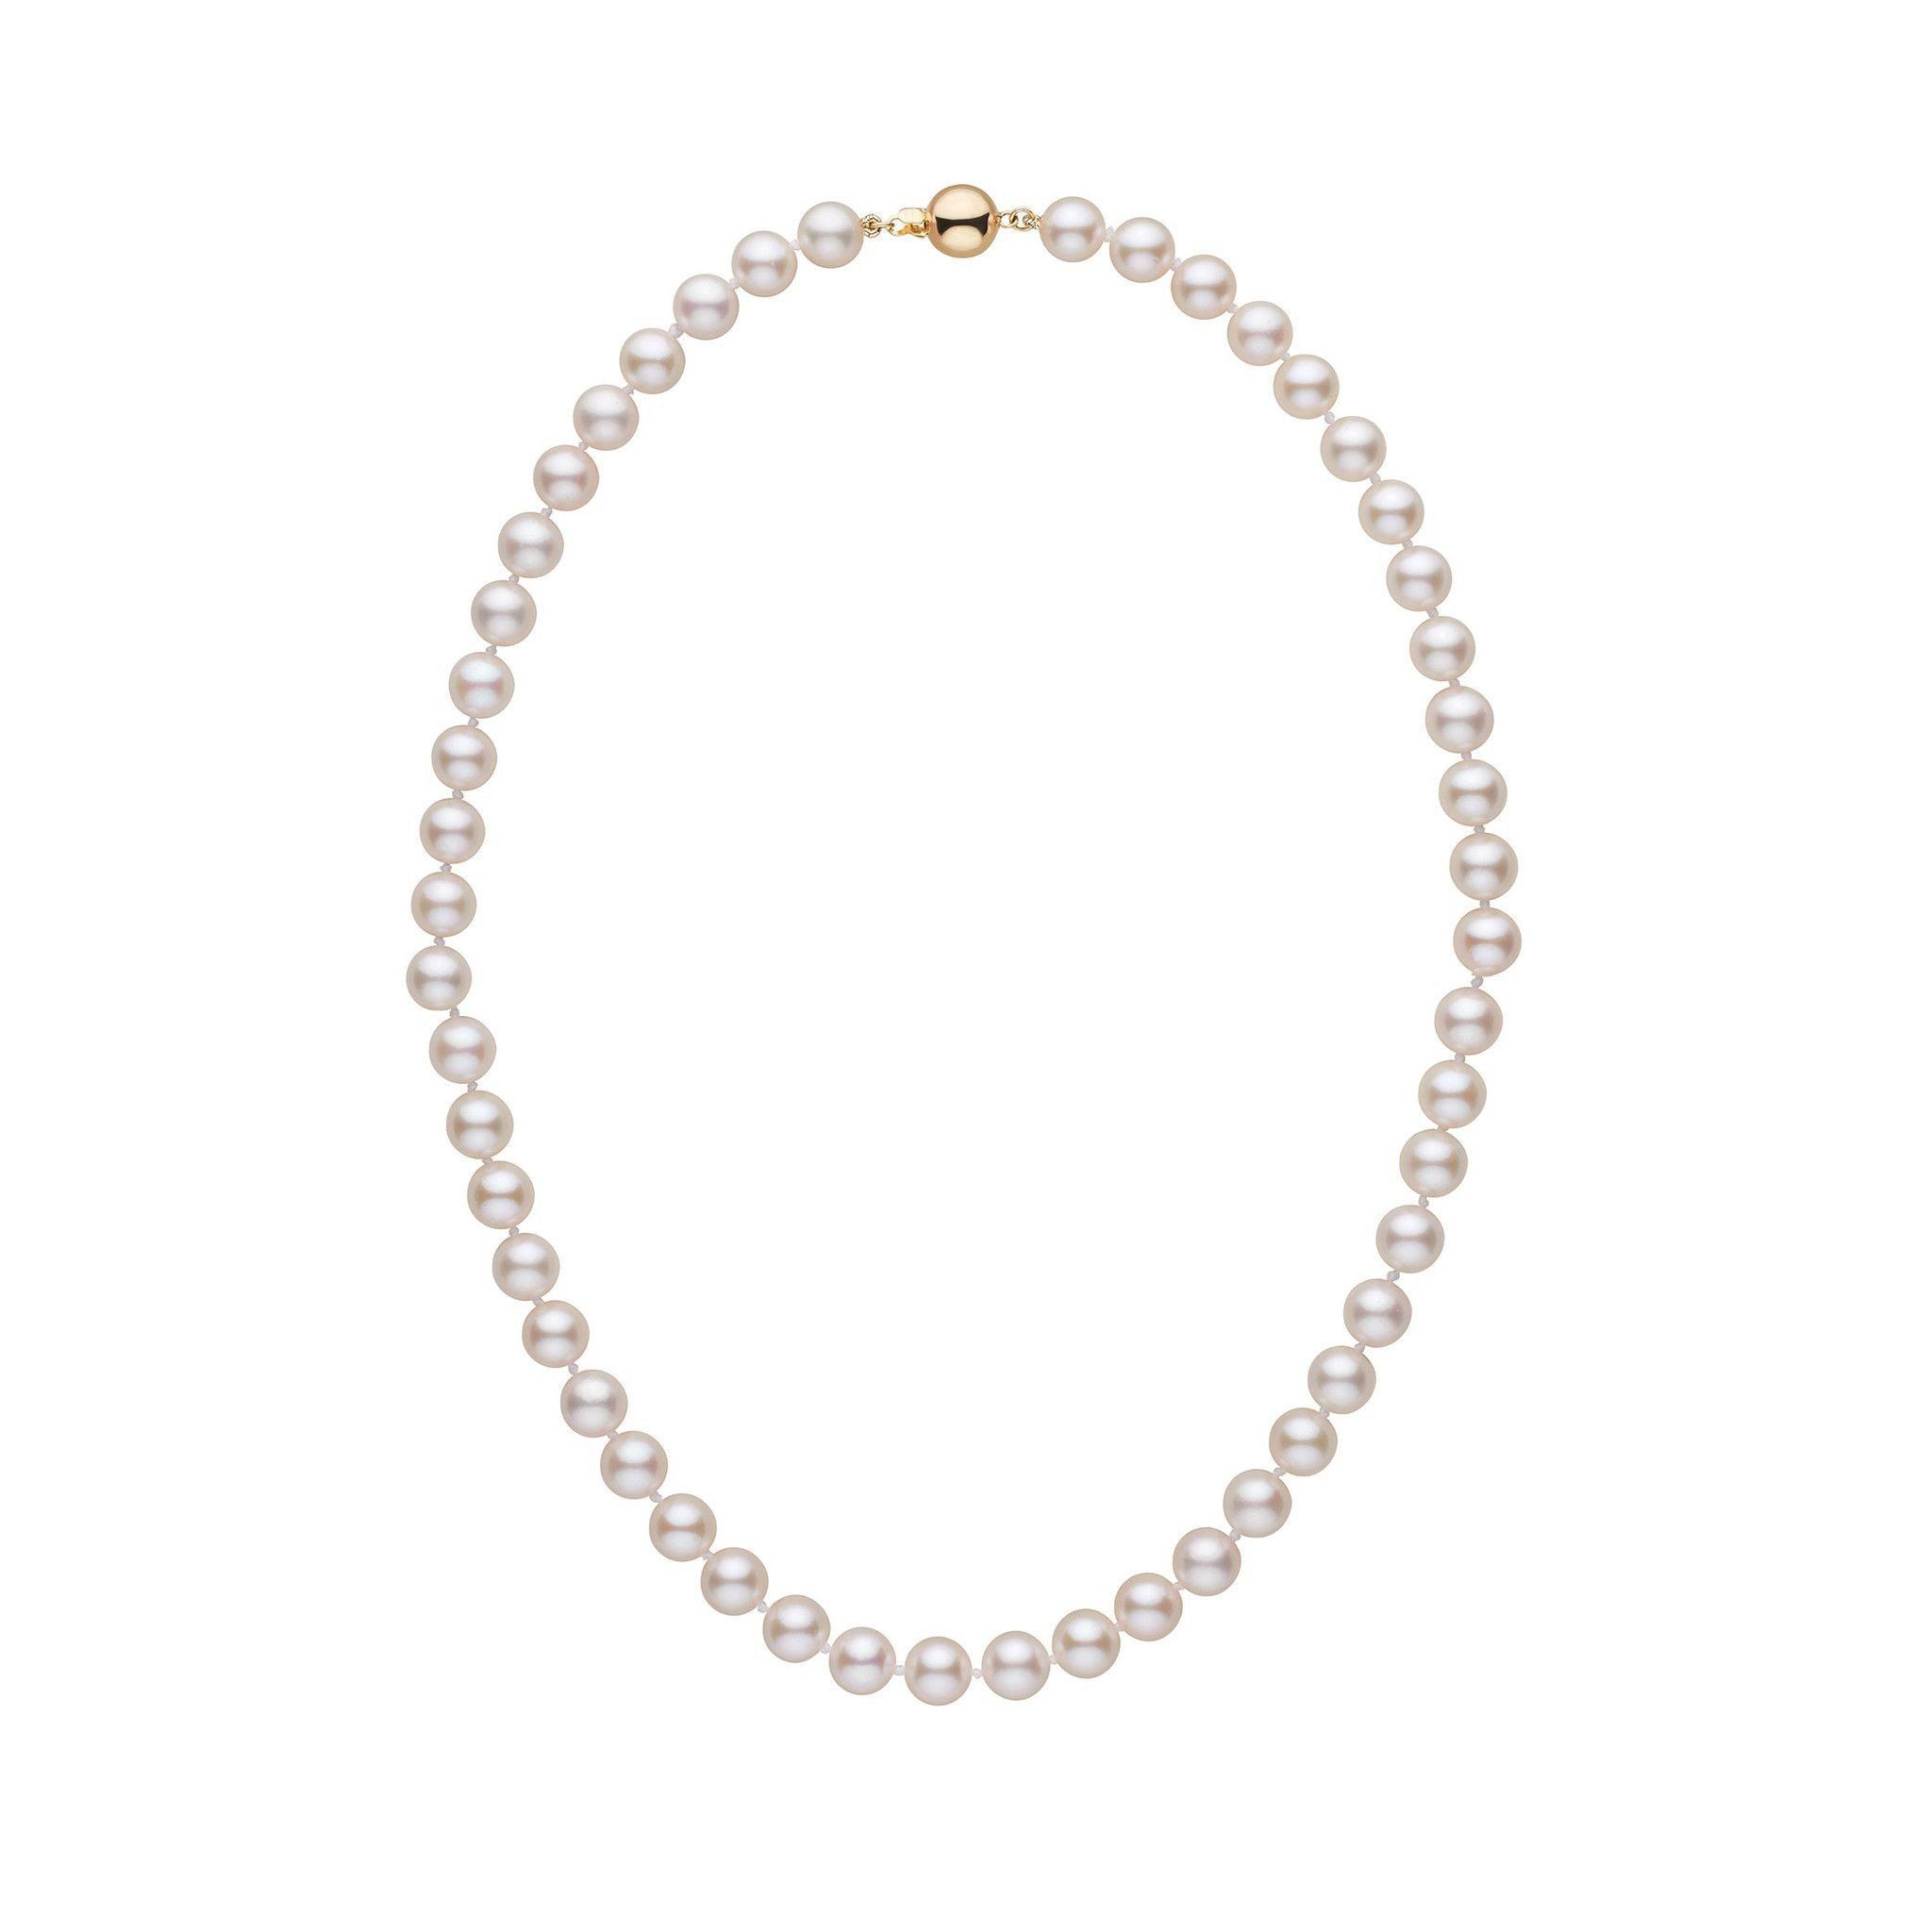 7.0-7.5 mm White Akoya 16 inch AA+ Pearl Necklace Yellow Gold